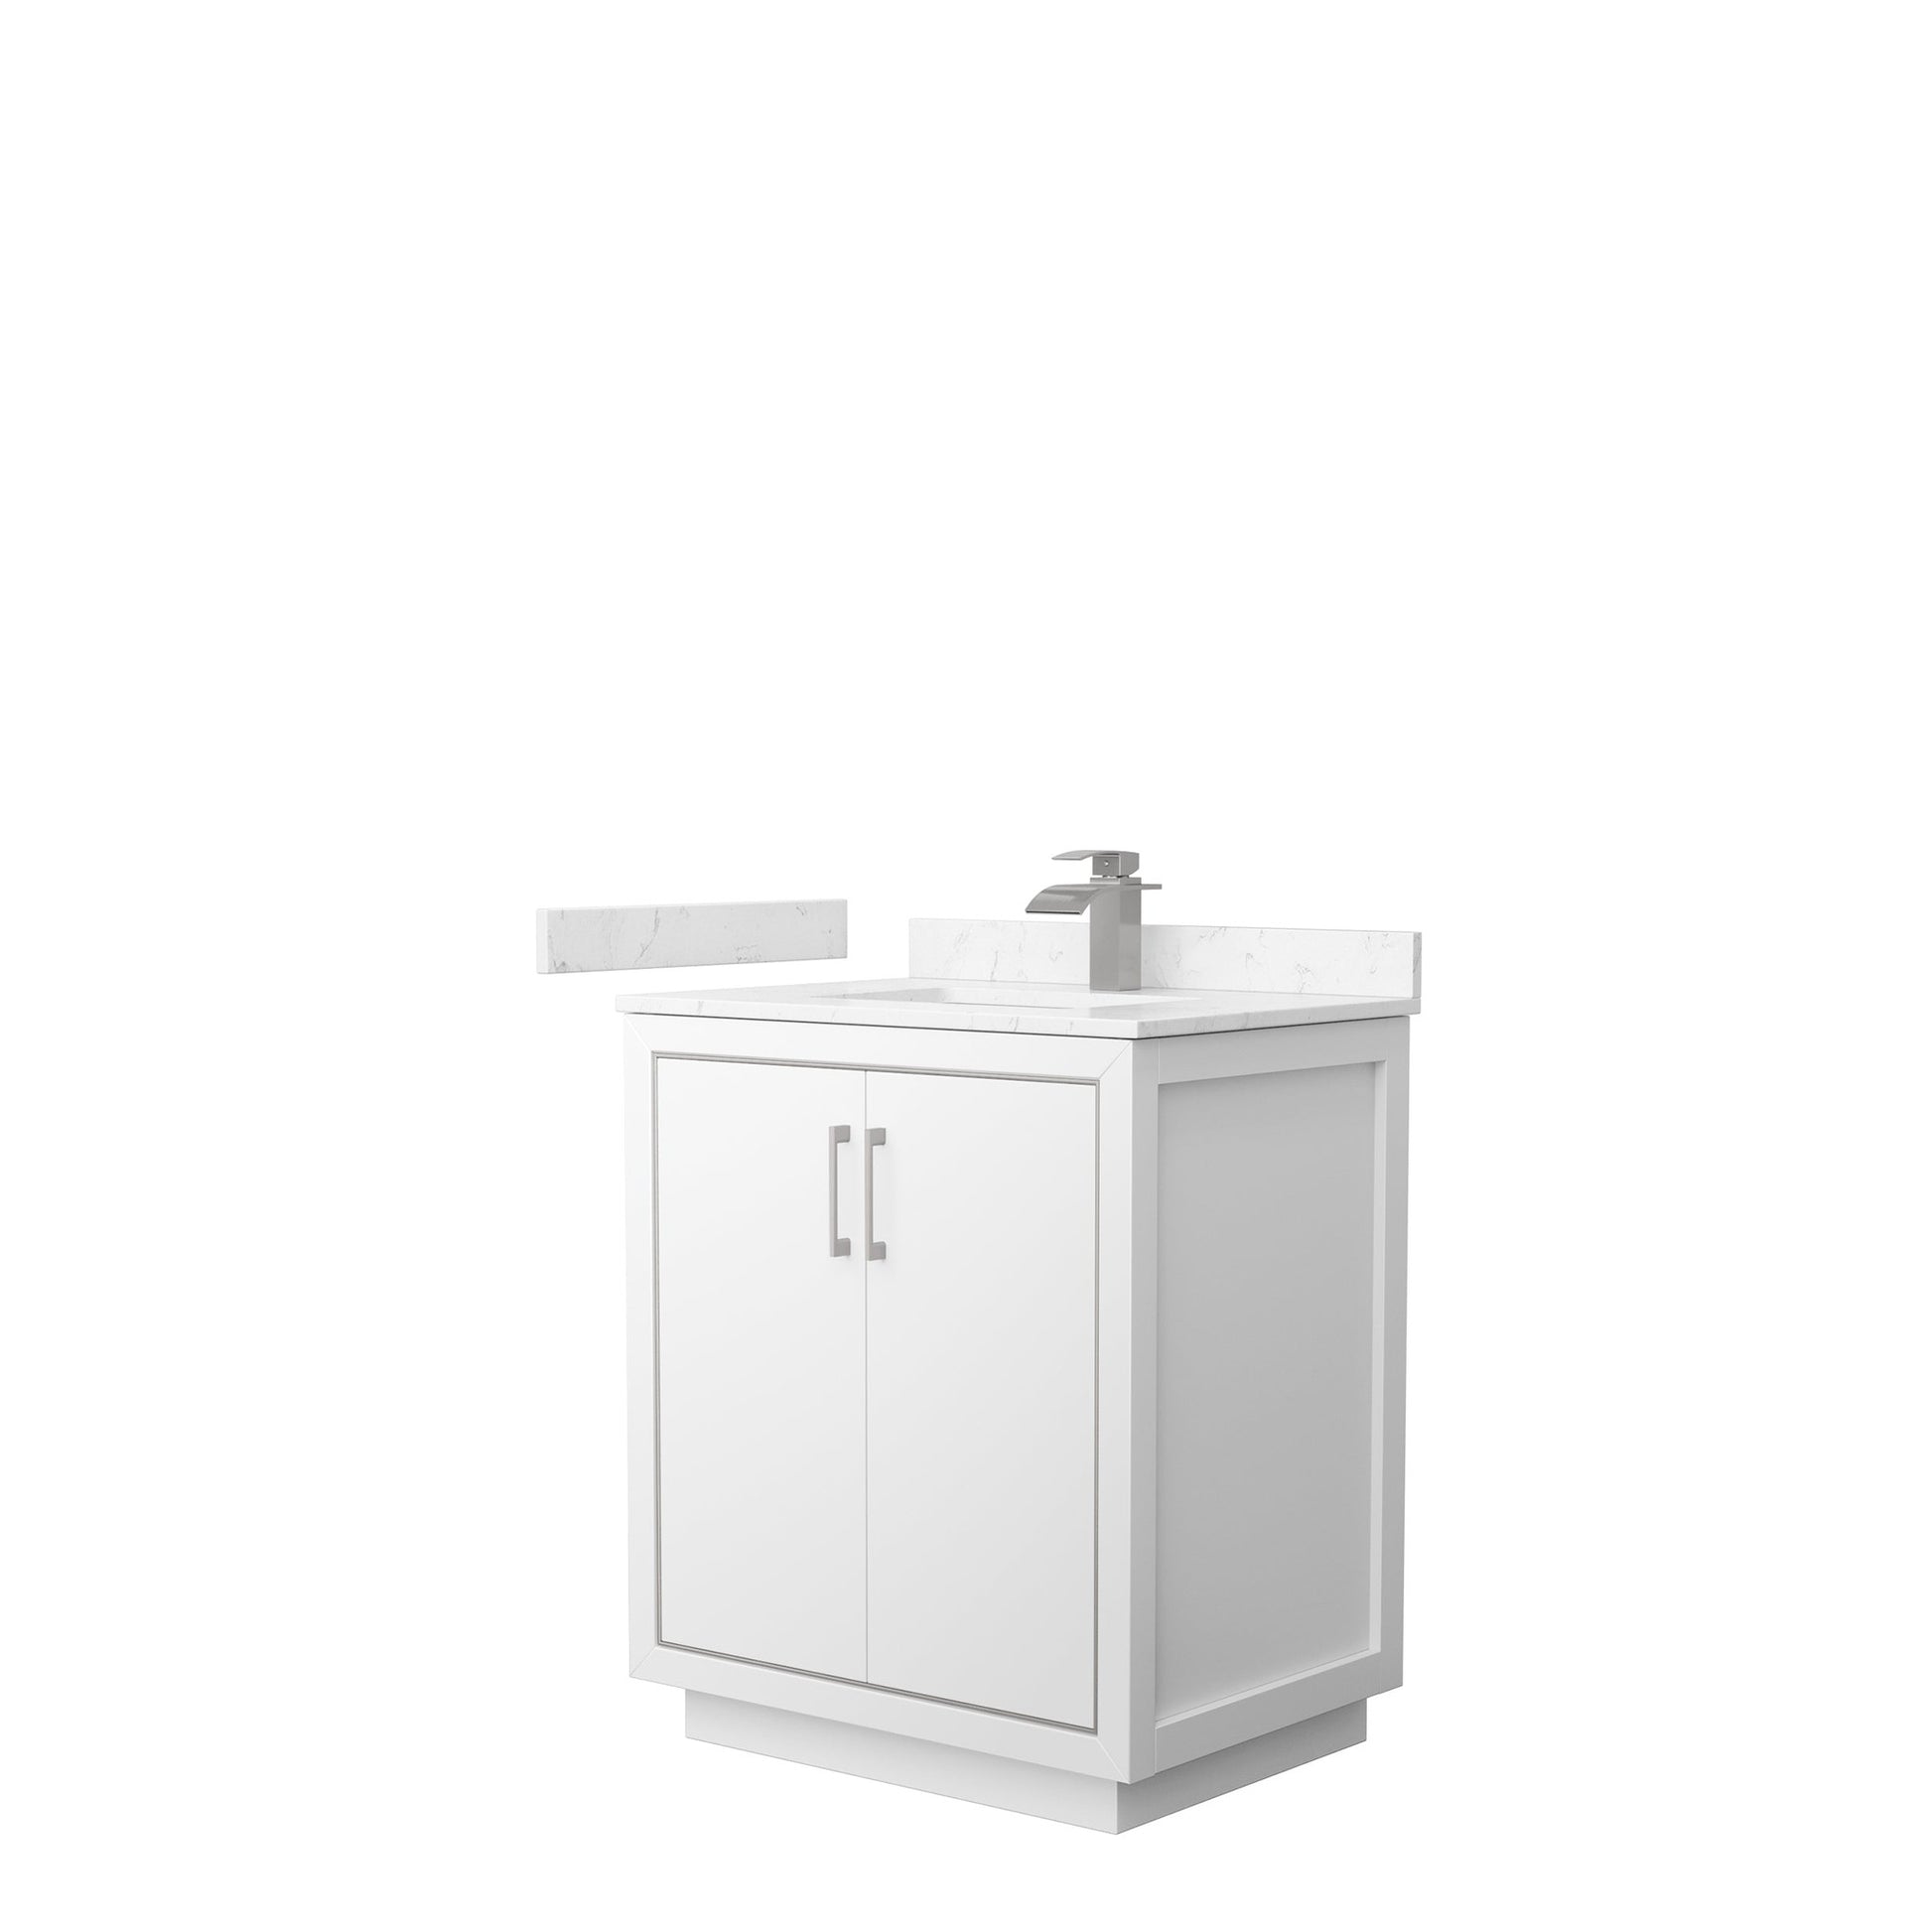 Wyndham Collection Icon 30" Single Bathroom Vanity in White, Carrara Cultured Marble Countertop, Undermount Square Sink, Brushed Nickel Trim